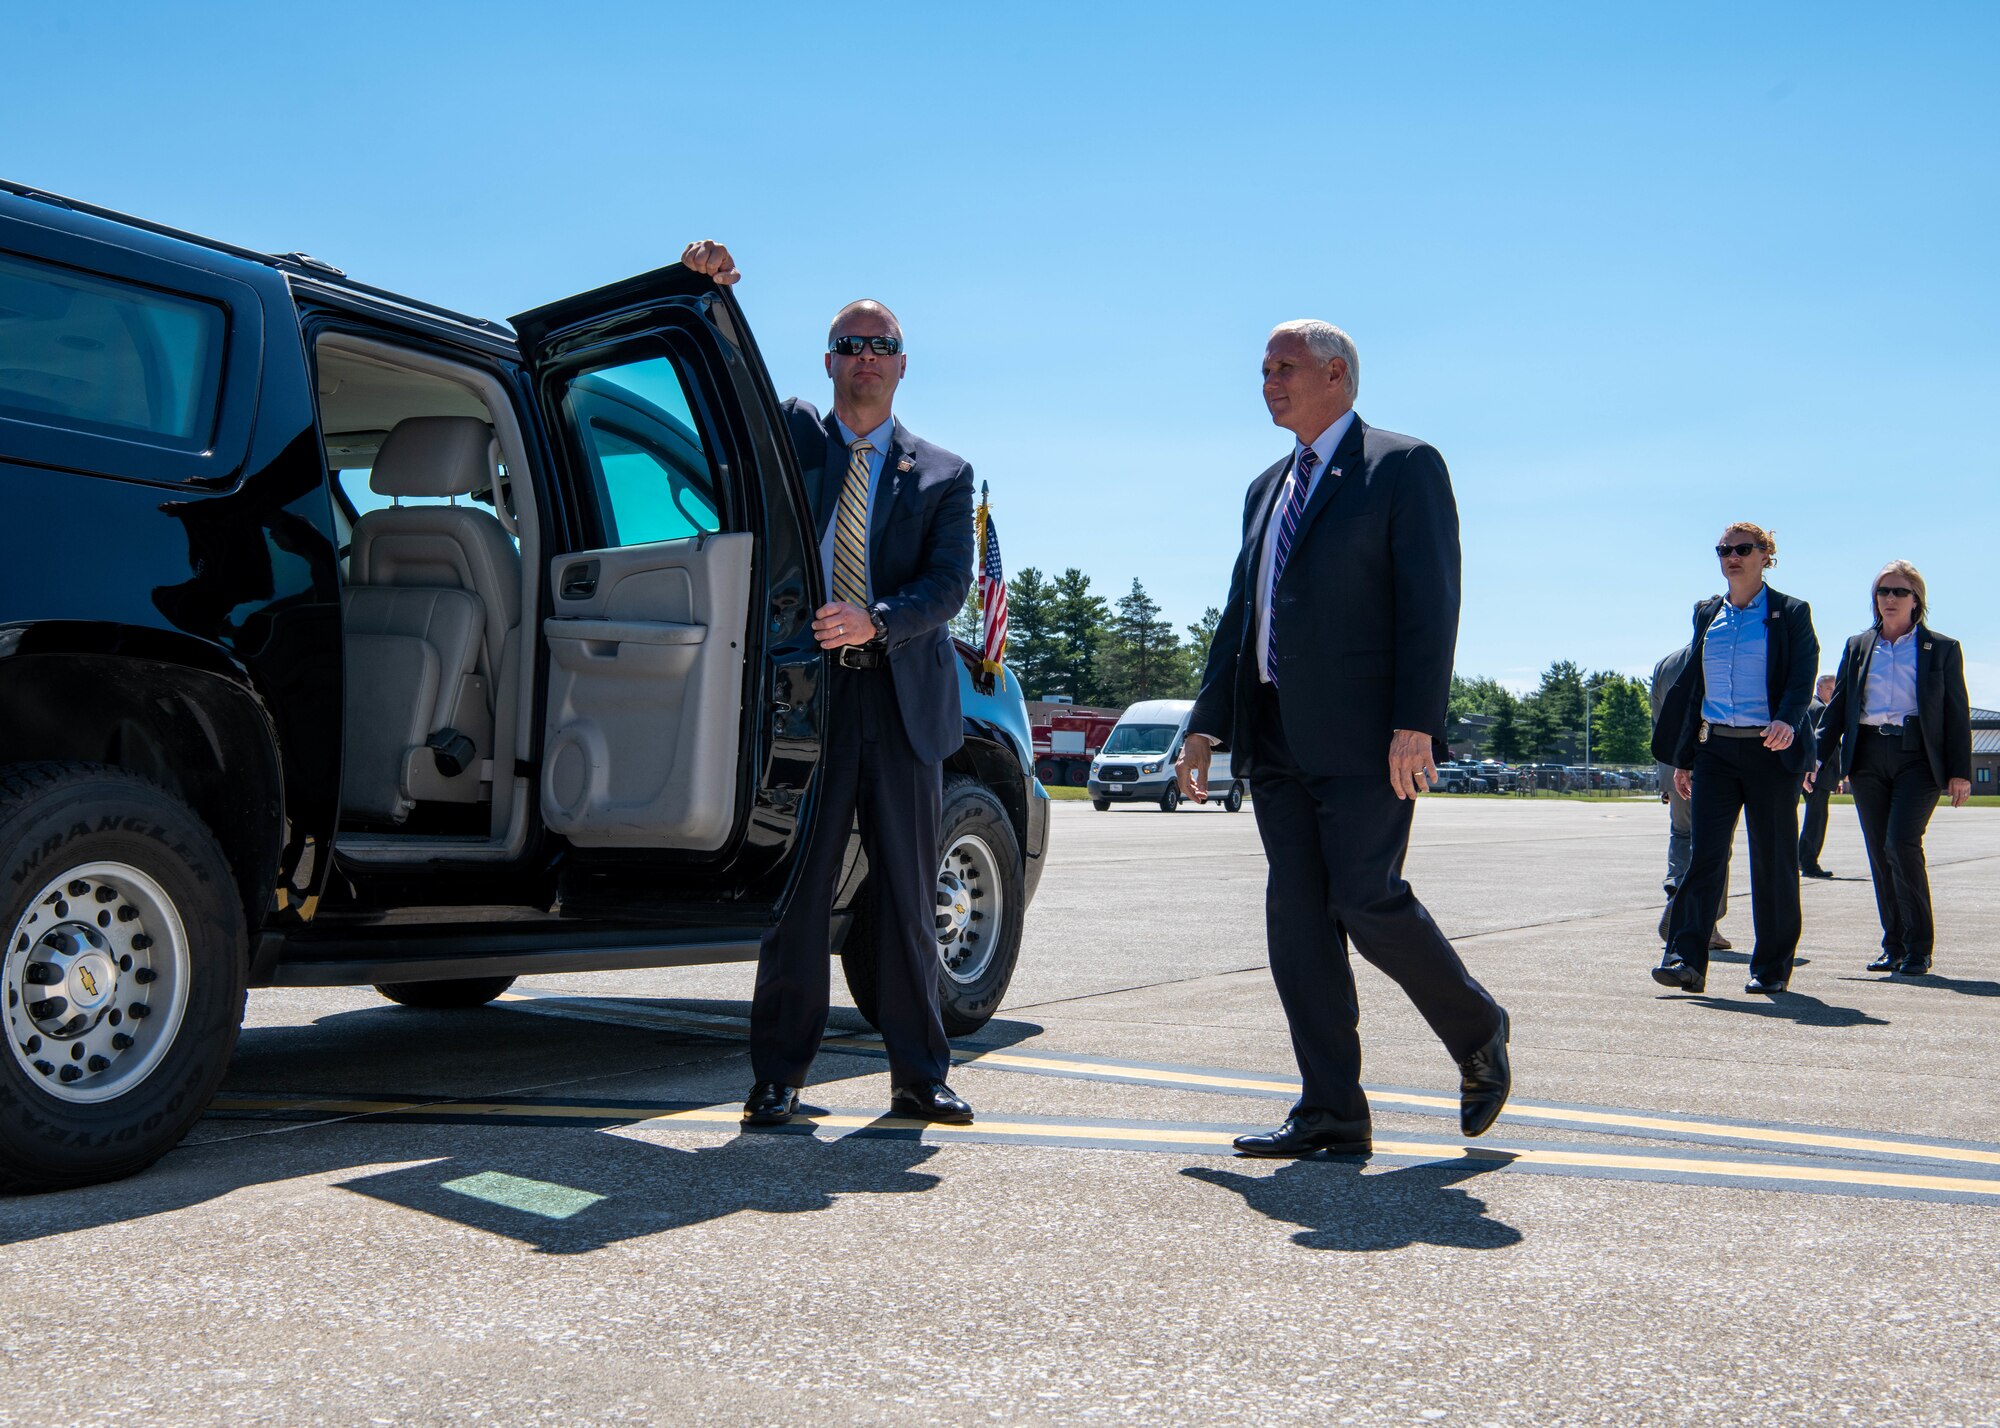 U.S. Vice President Mike Pence landed at YARS before attending a local event June 25, 2020.